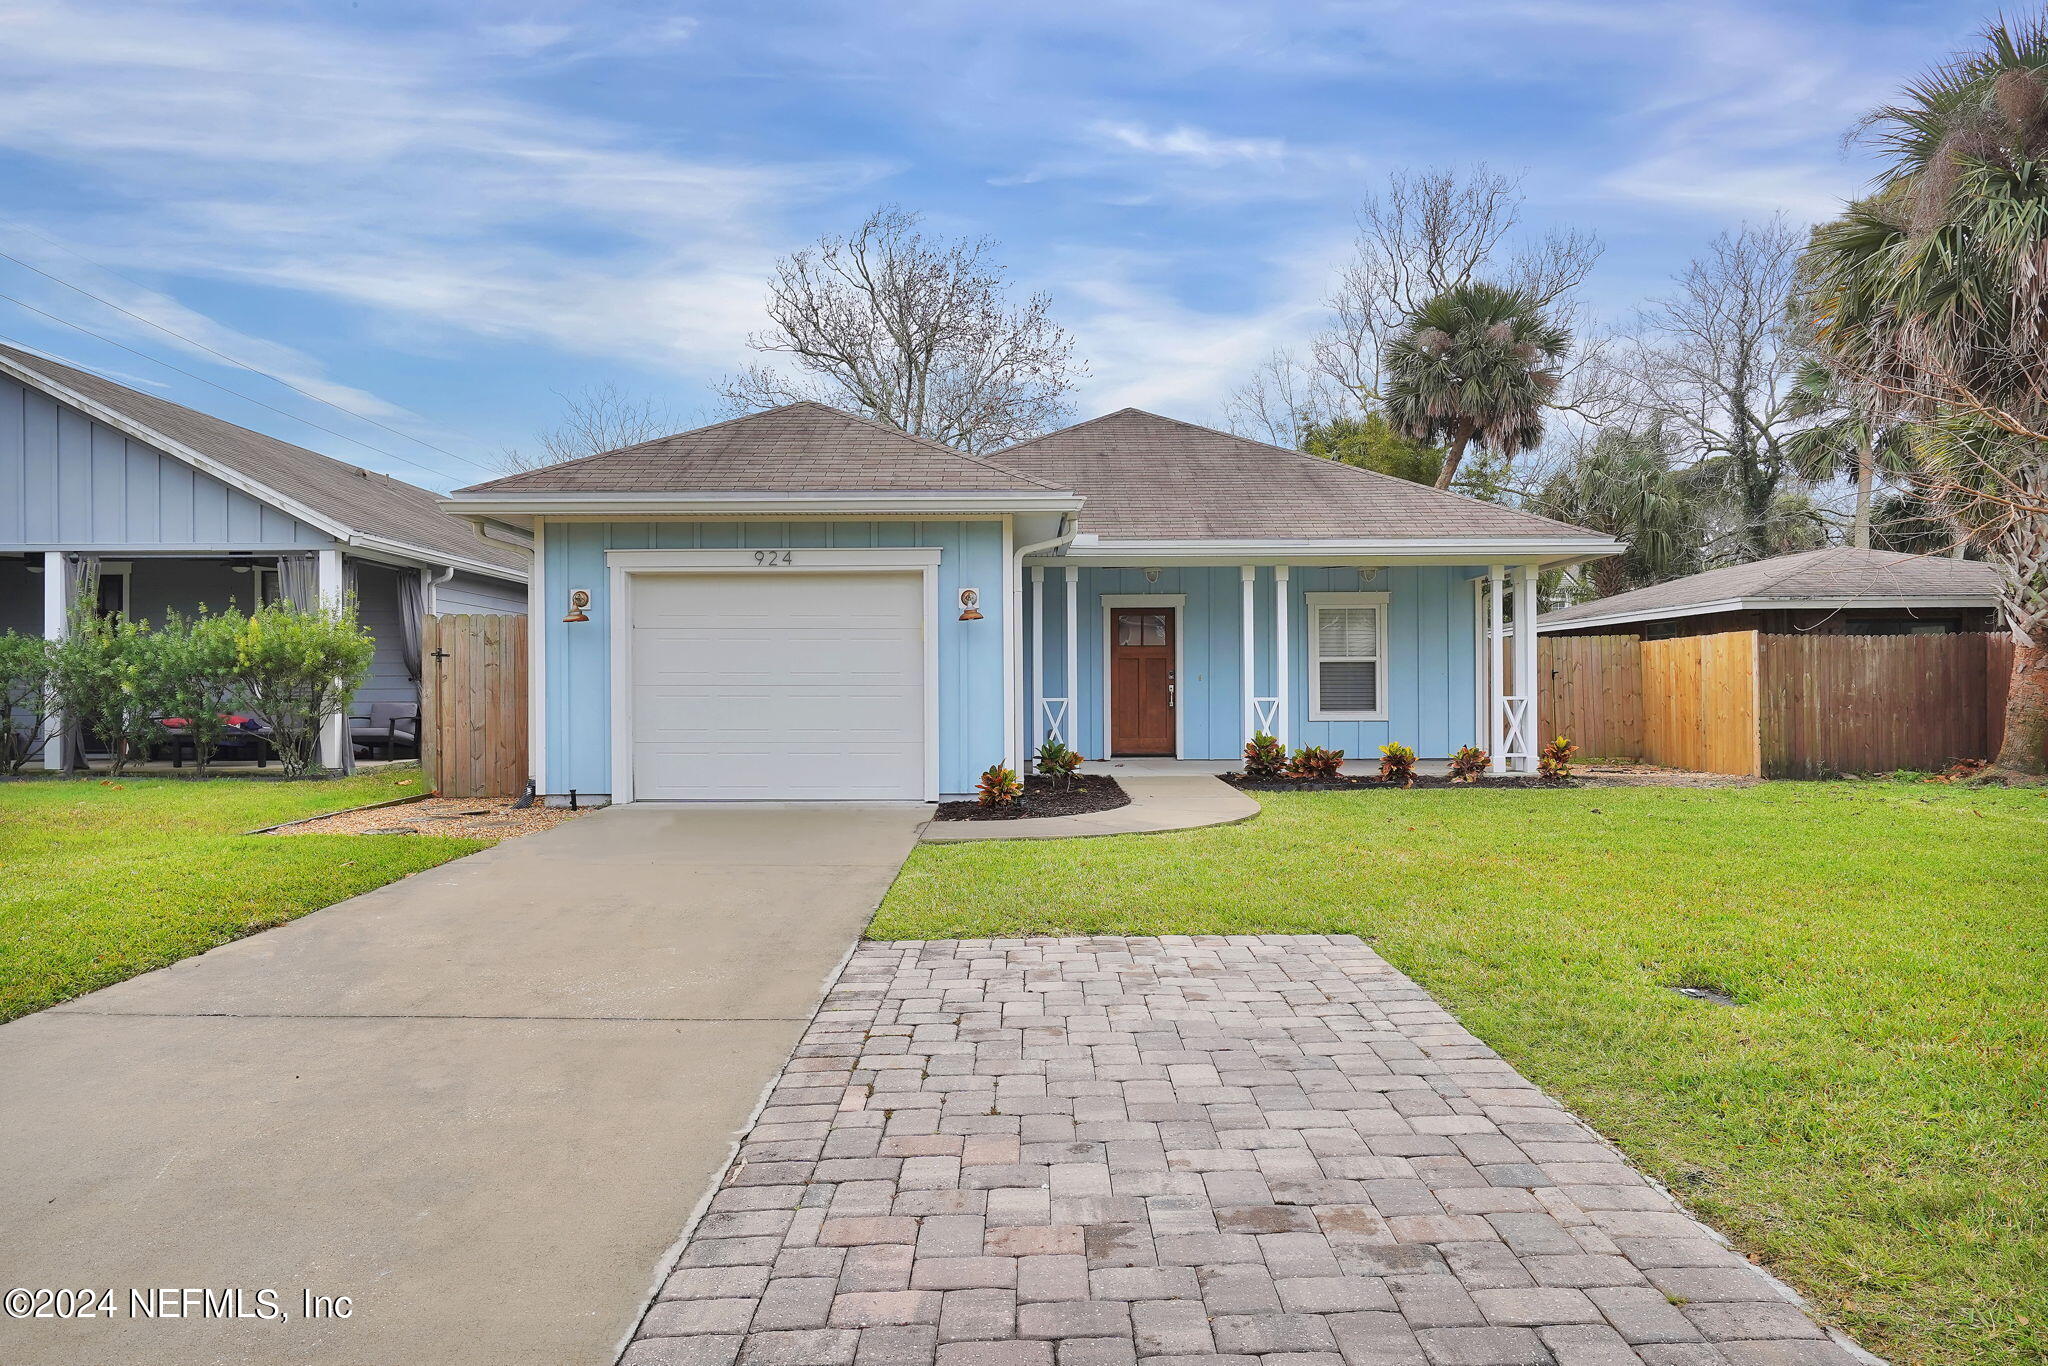 Jacksonville Beach, FL home for sale located at 924 13th Avenue S, Jacksonville Beach, FL 32250